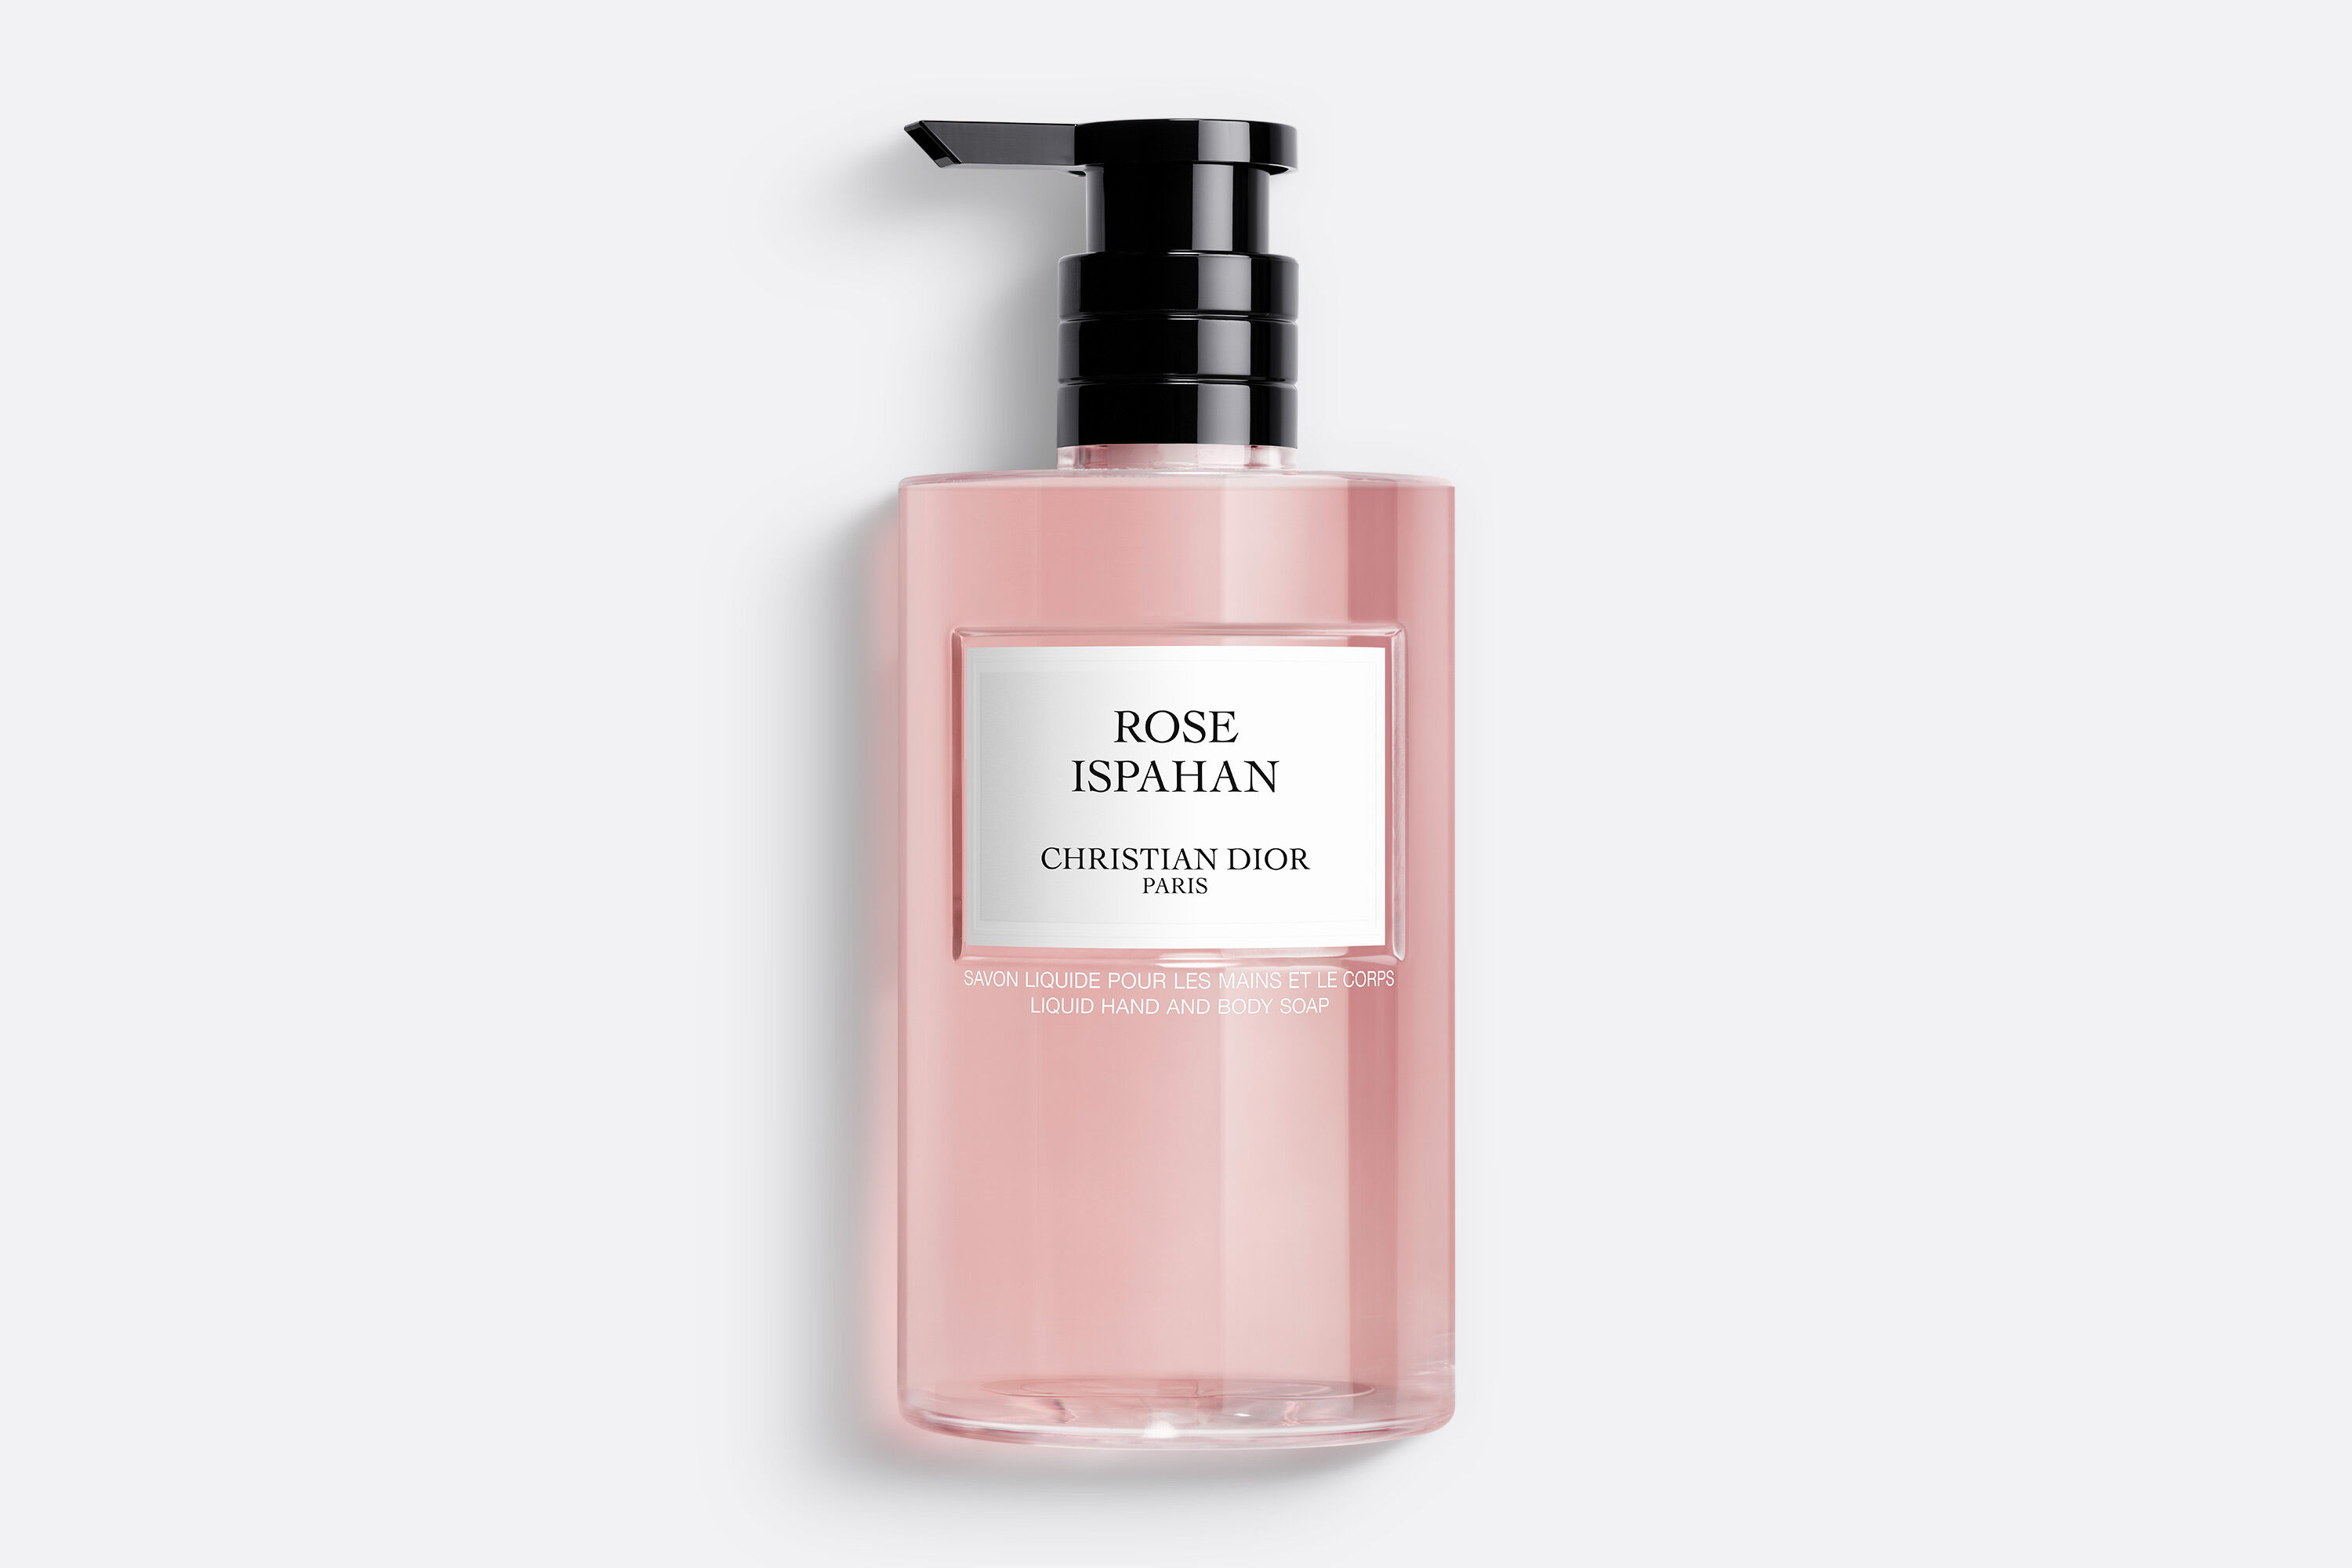 Rose Ispahan Liquid hand and body soap  Collection Privee Christian Dior   Fragrance  DIOR